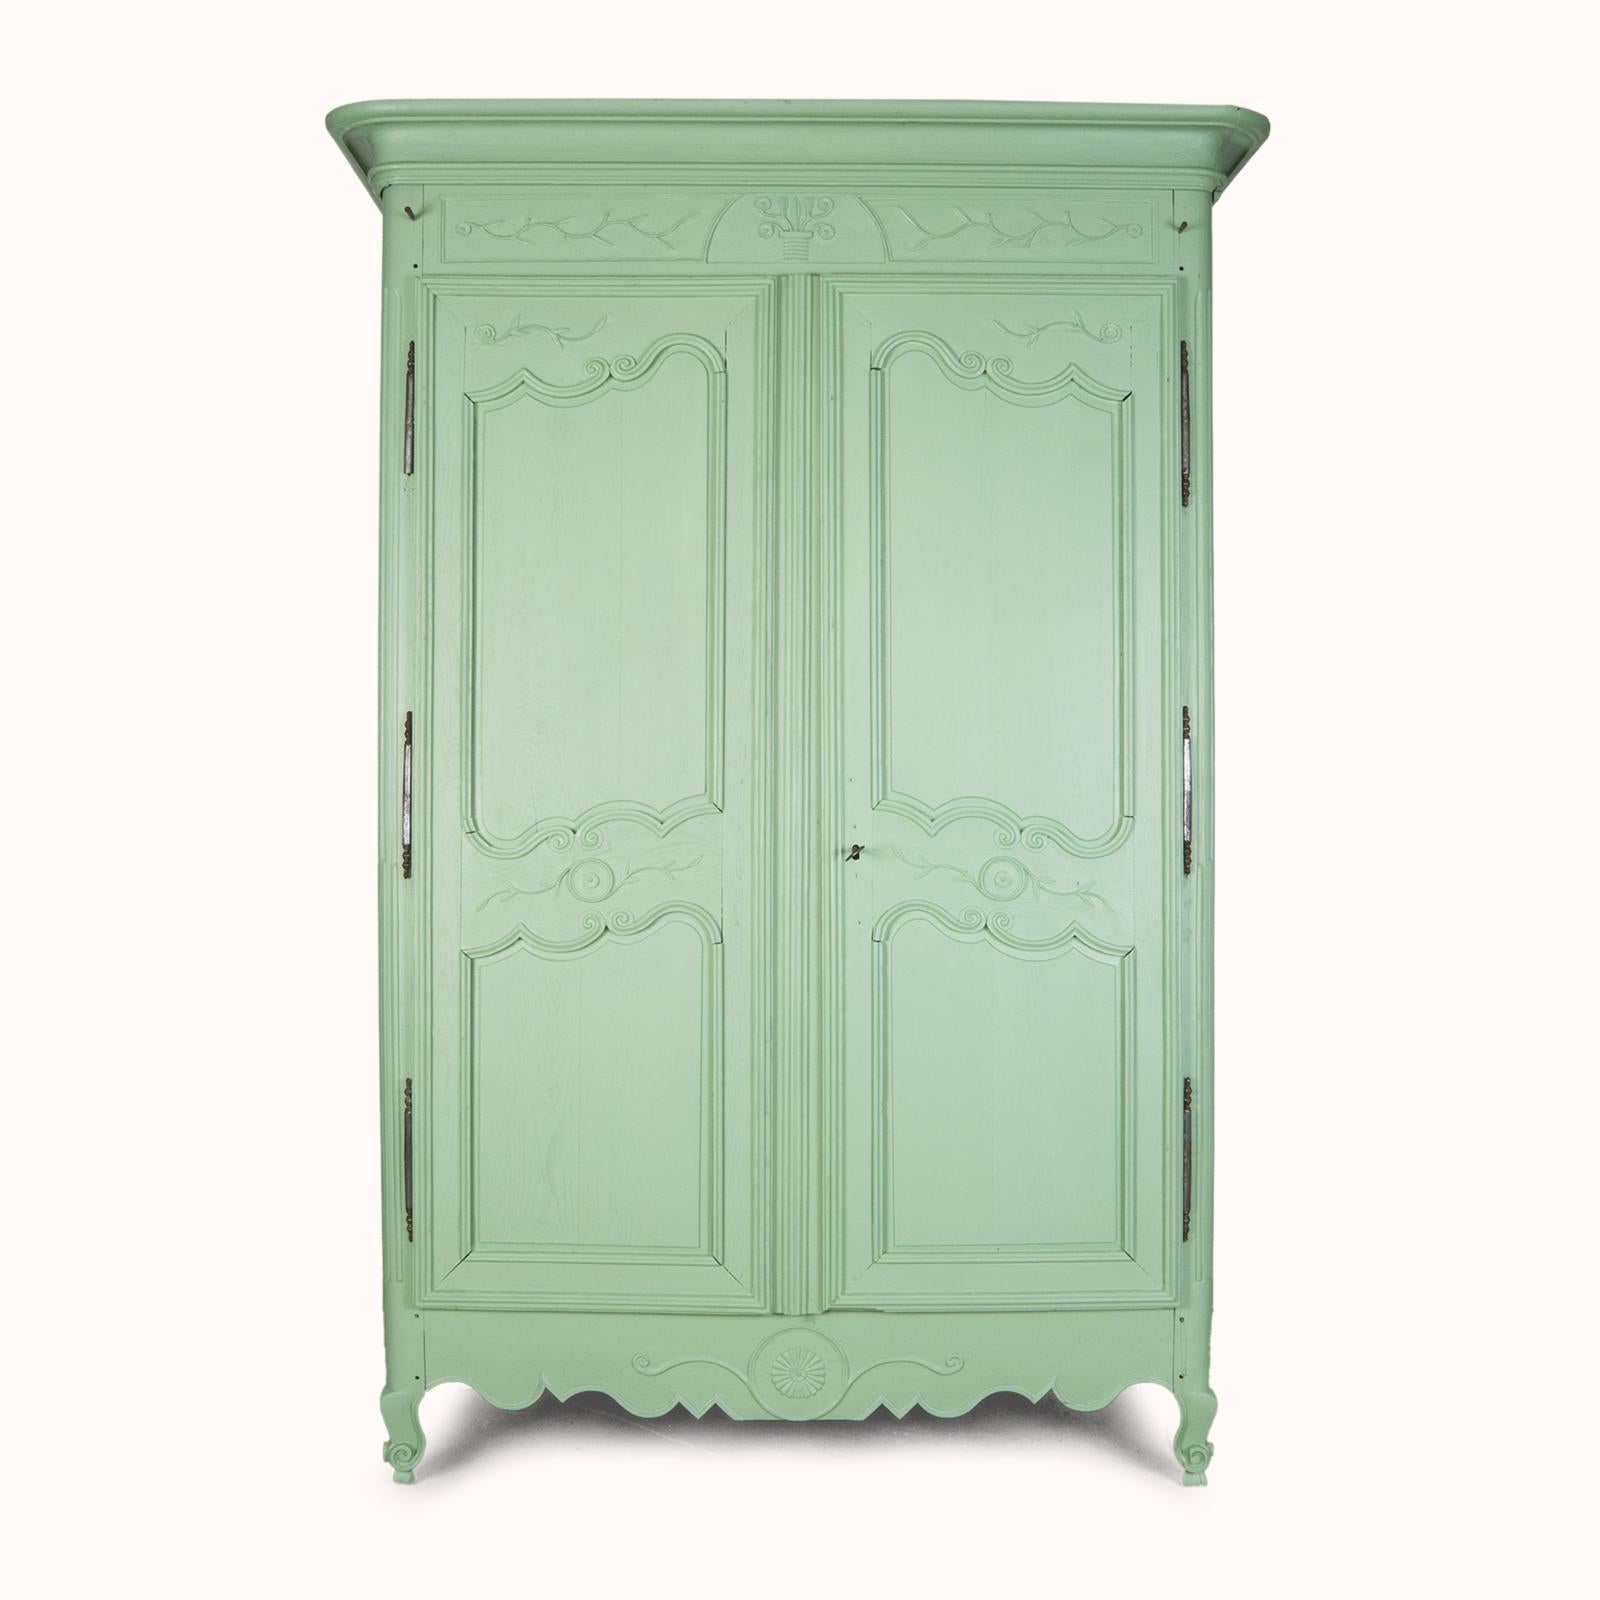 Lovely Antique 19th C Soft Green French Marriage Armoire or Wardrobe For Sale 3